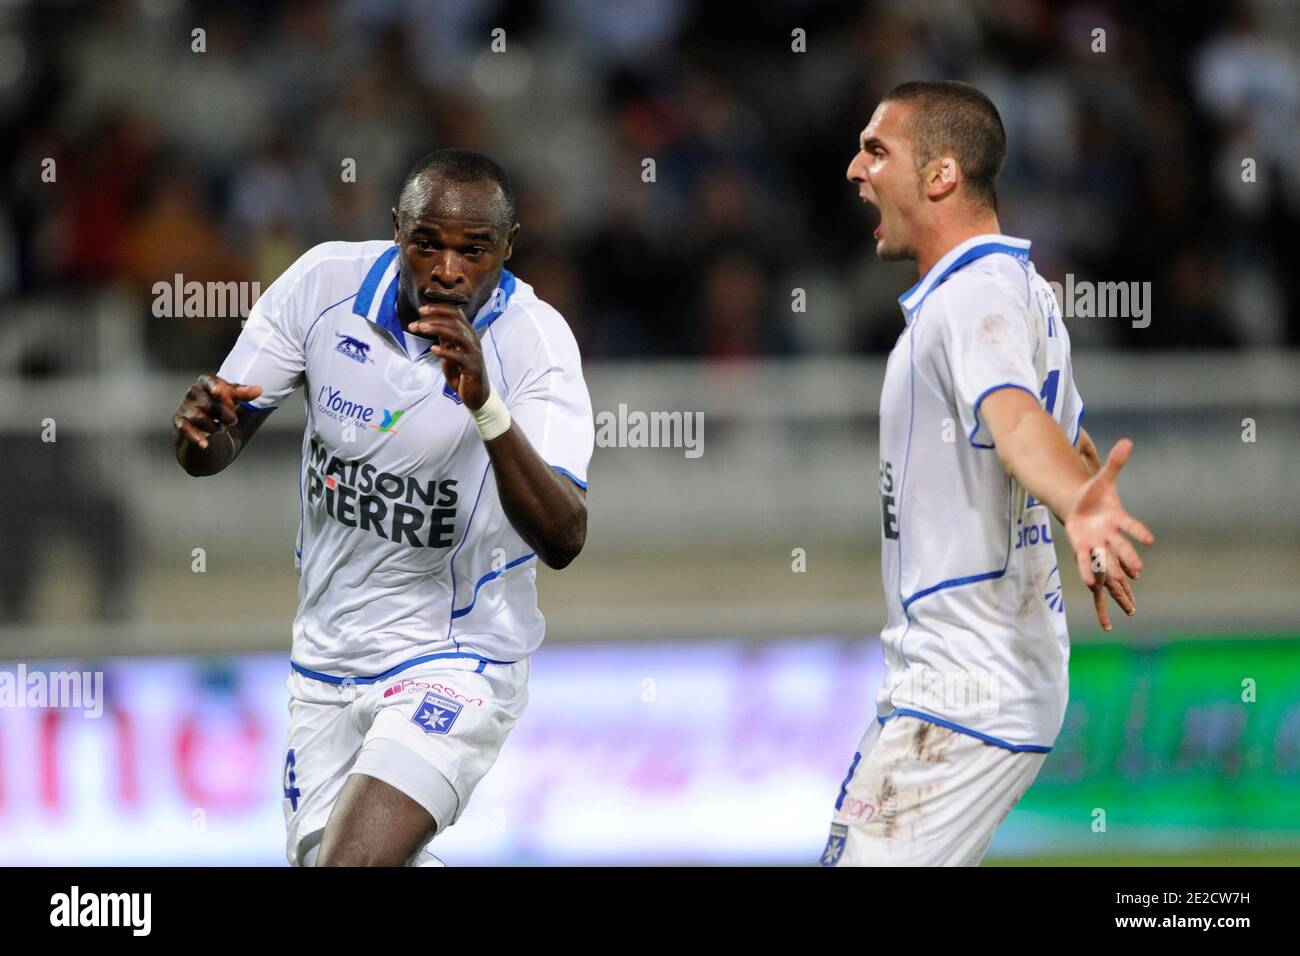 Auxerre's Dennis Oliech and Ben Sahar joy after Oliech scores the 1-0 goal during the French First League soccer match, AJ Auxerre vs Lille OSC in Auxerre, France, on October 15, 2011. Lille won 3-1. Photo by Henri Szwarc/ABACAPRESS.COM Stock Photo